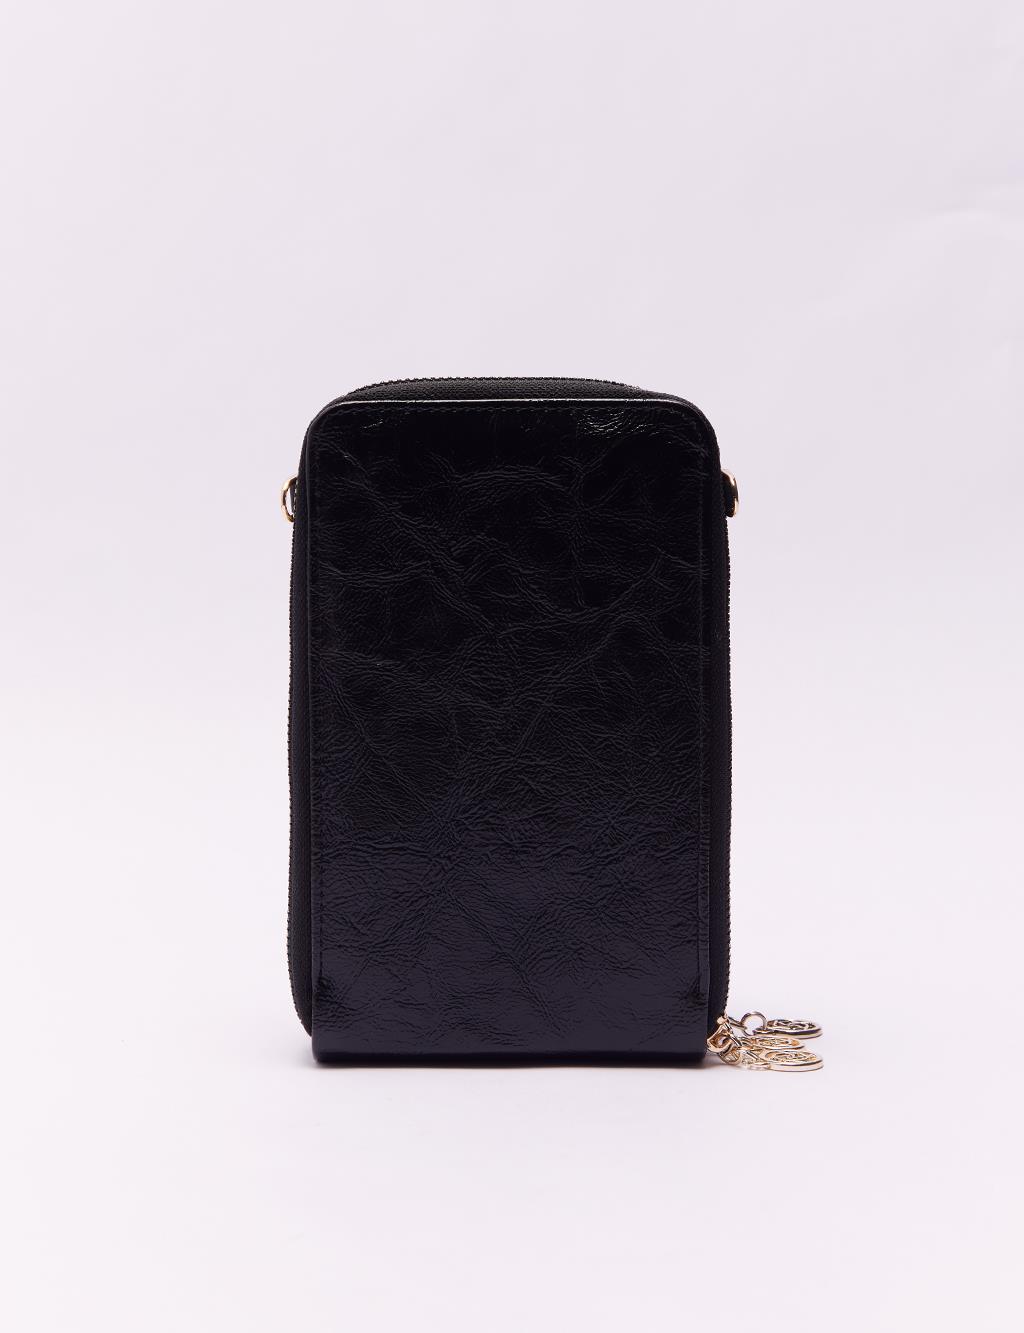 Three Compartments Wrinkled Patent Leather Wallet Bag Black